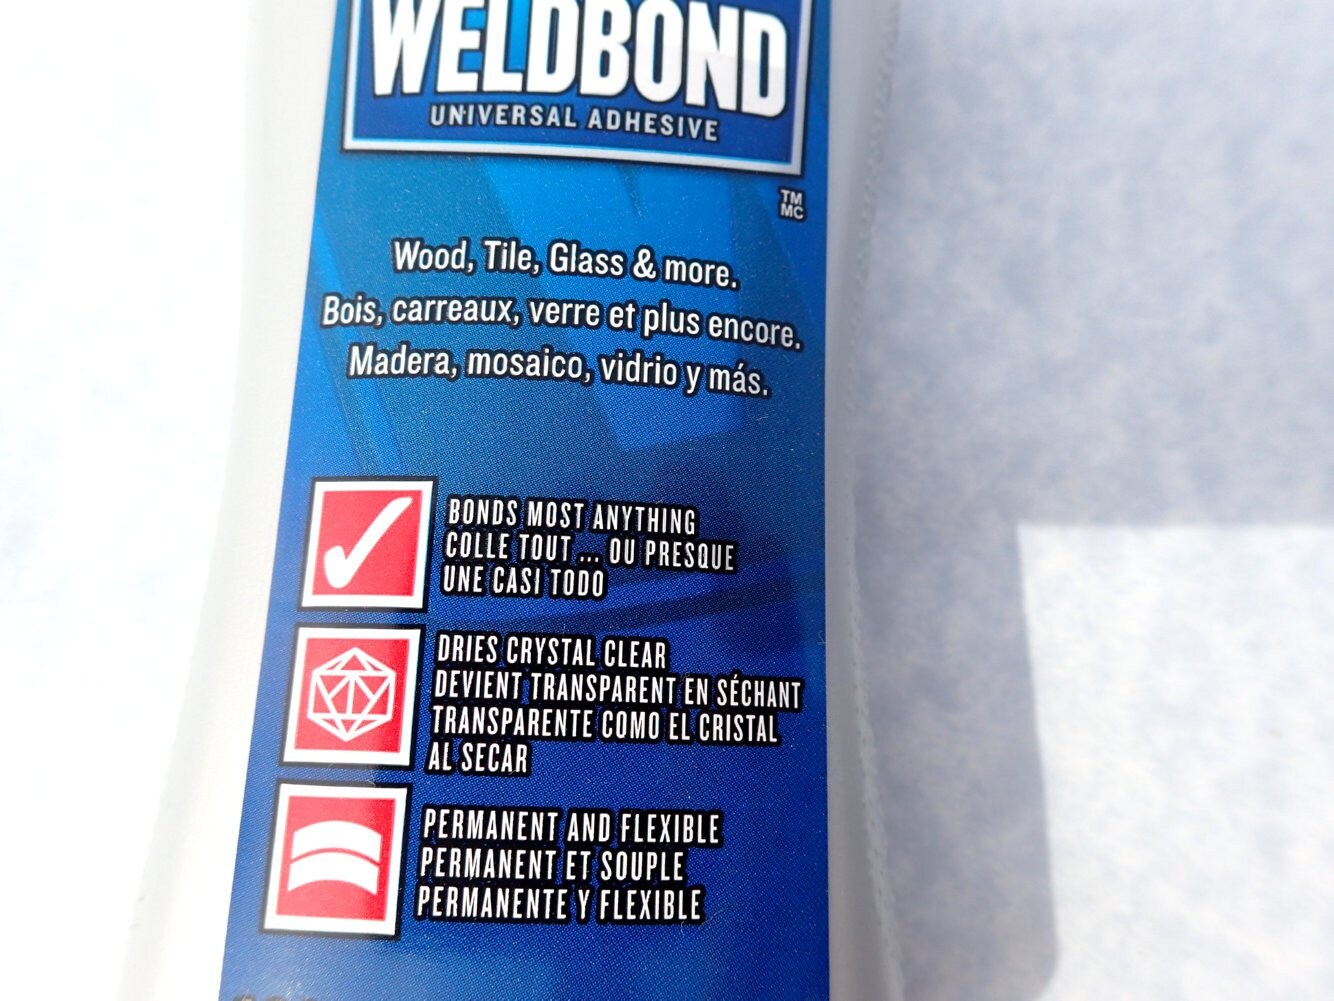 Weldbond 5.4 oz - Adhesive for Mosaics and Crafts - Clear Drying